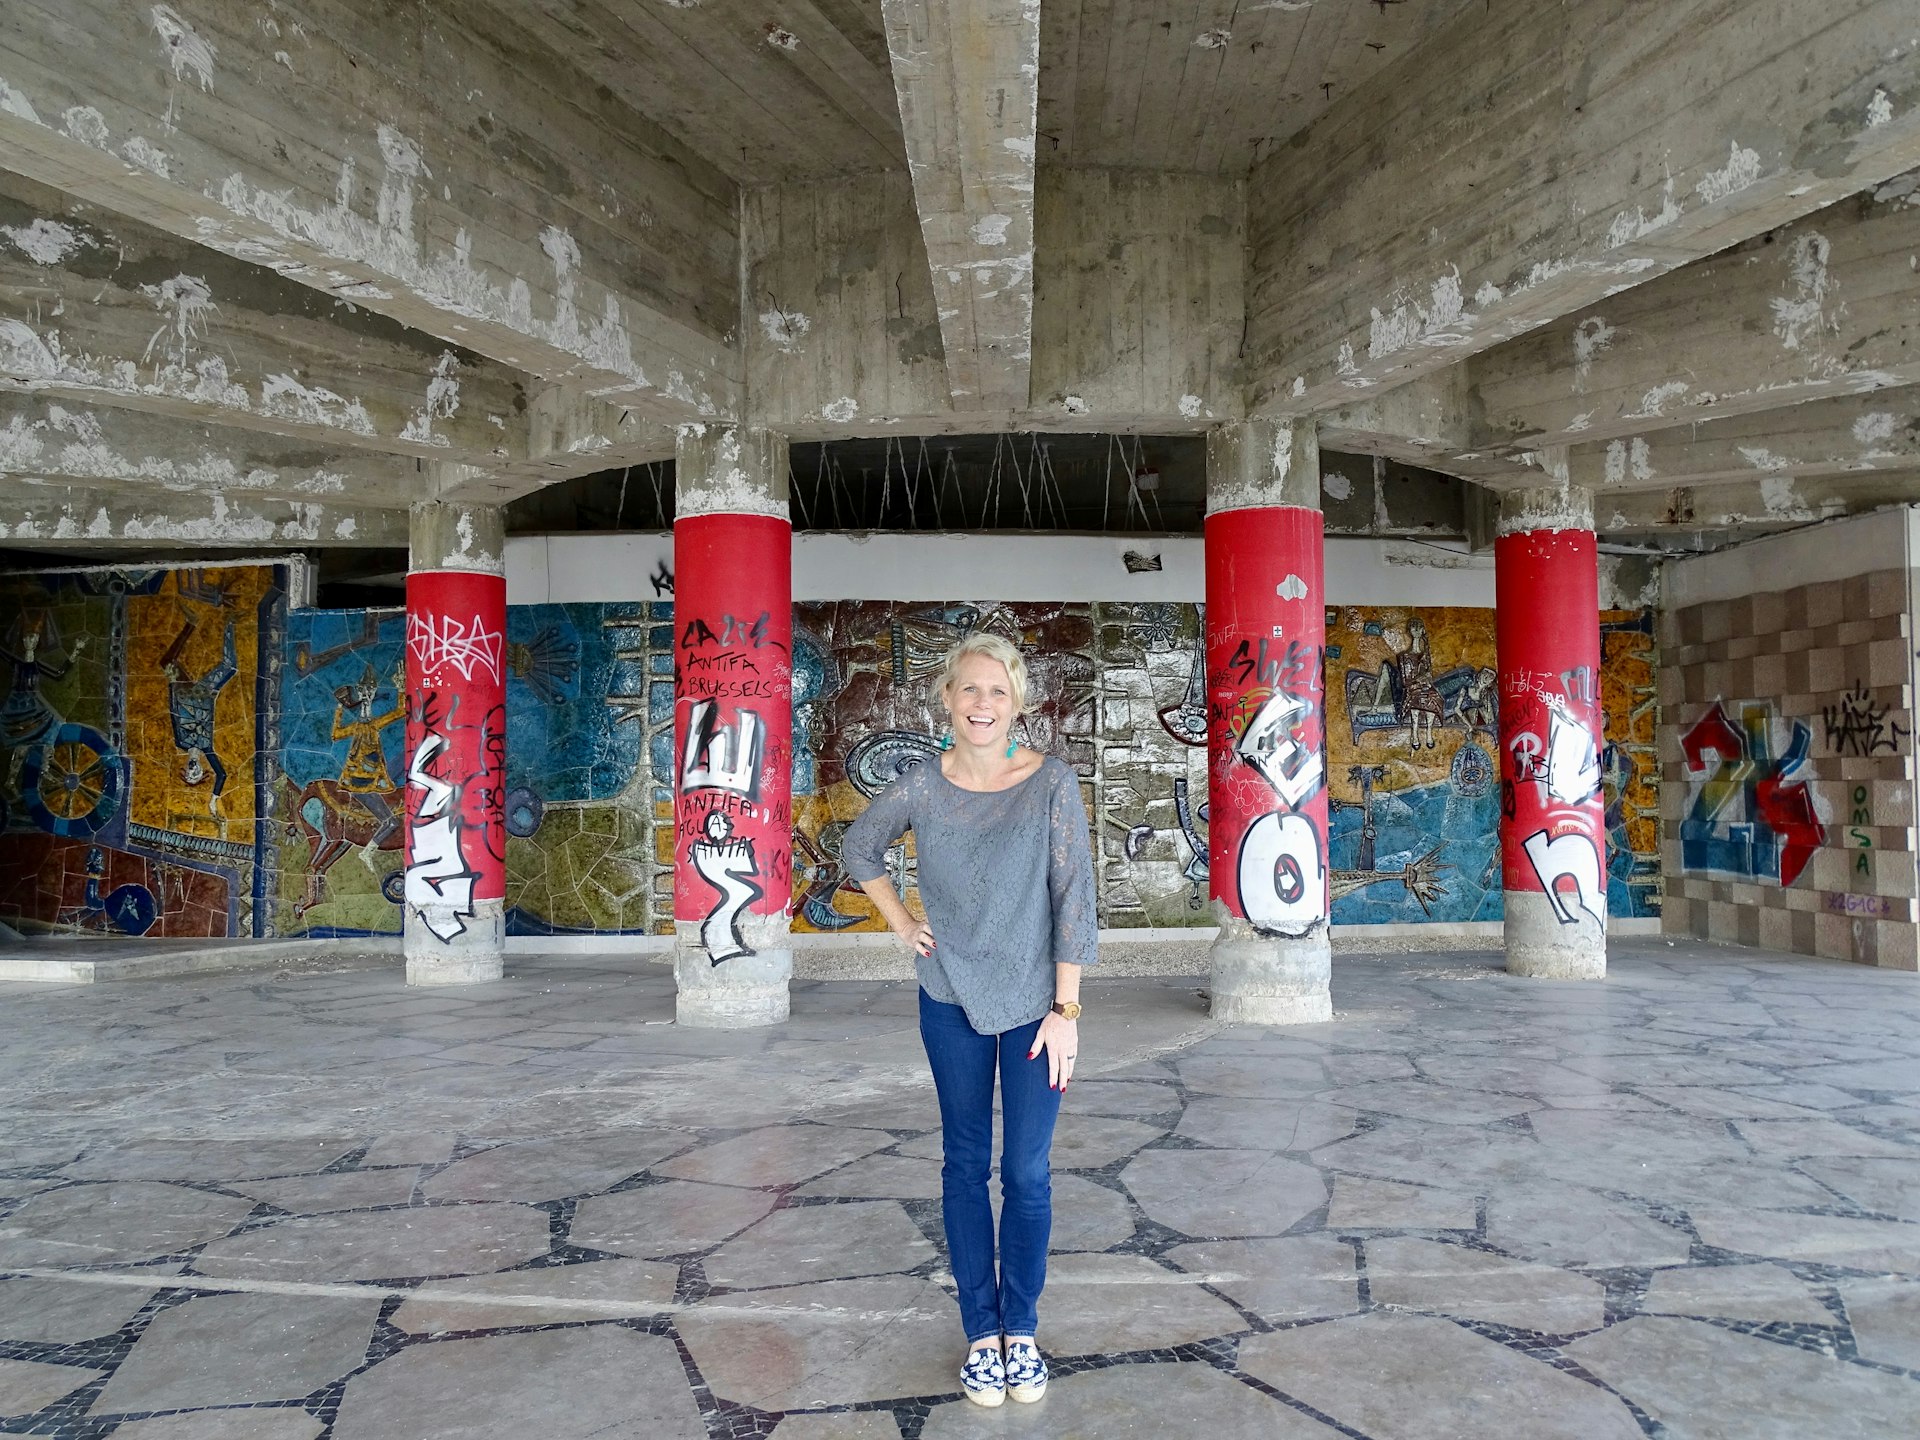 A woman poses smiling in front of graffitied columns in the Miradouro Panoramico de Monsanto, Lisbon. 